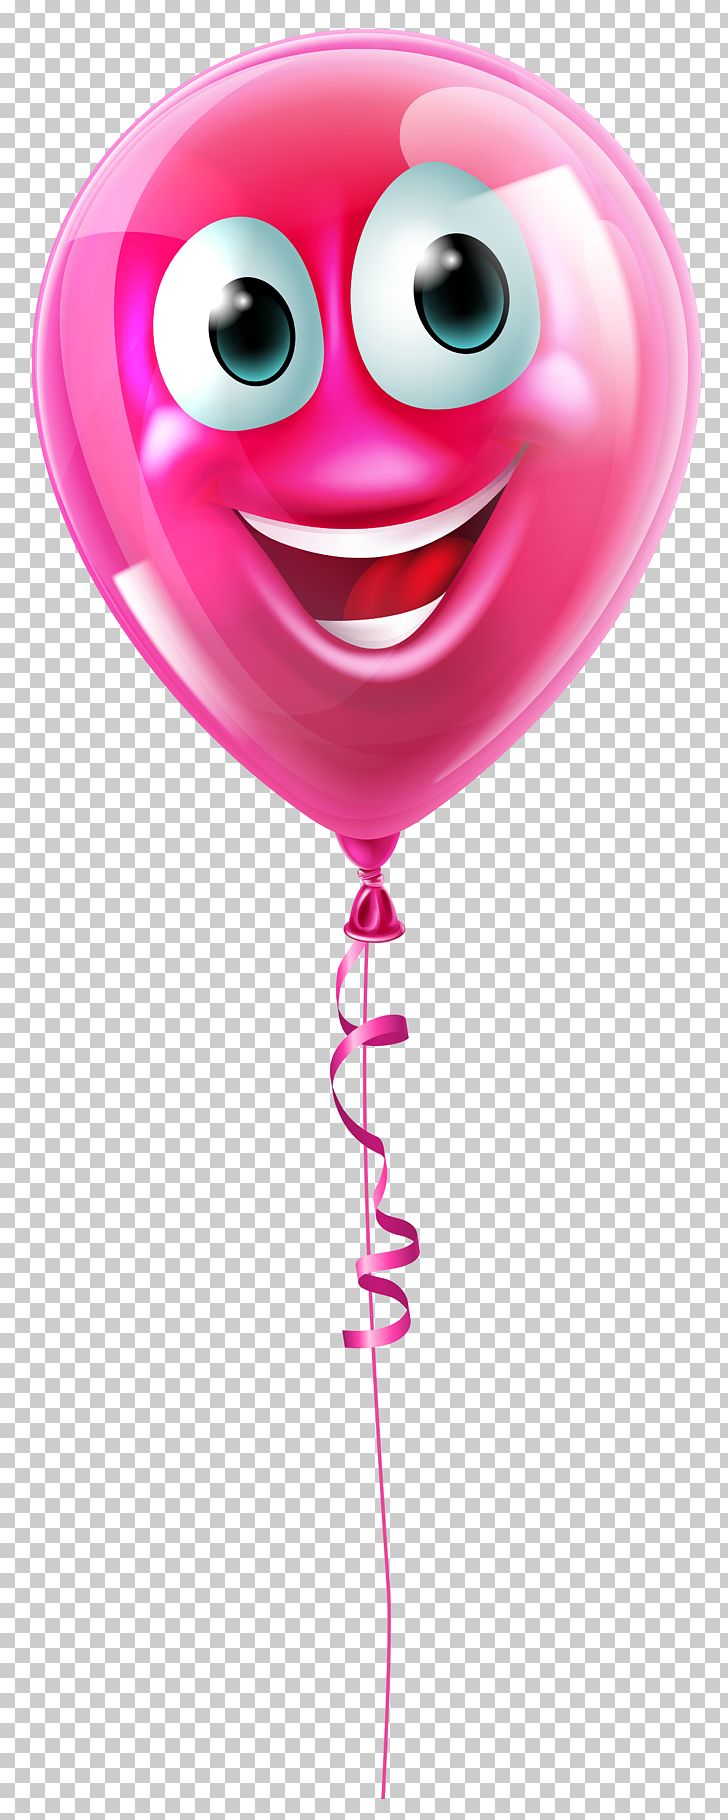 Balloon Face Smiley Icon PNG, Clipart, Balloon, Balloons, Birthday, Clipart, Computer Icons Free PNG Download